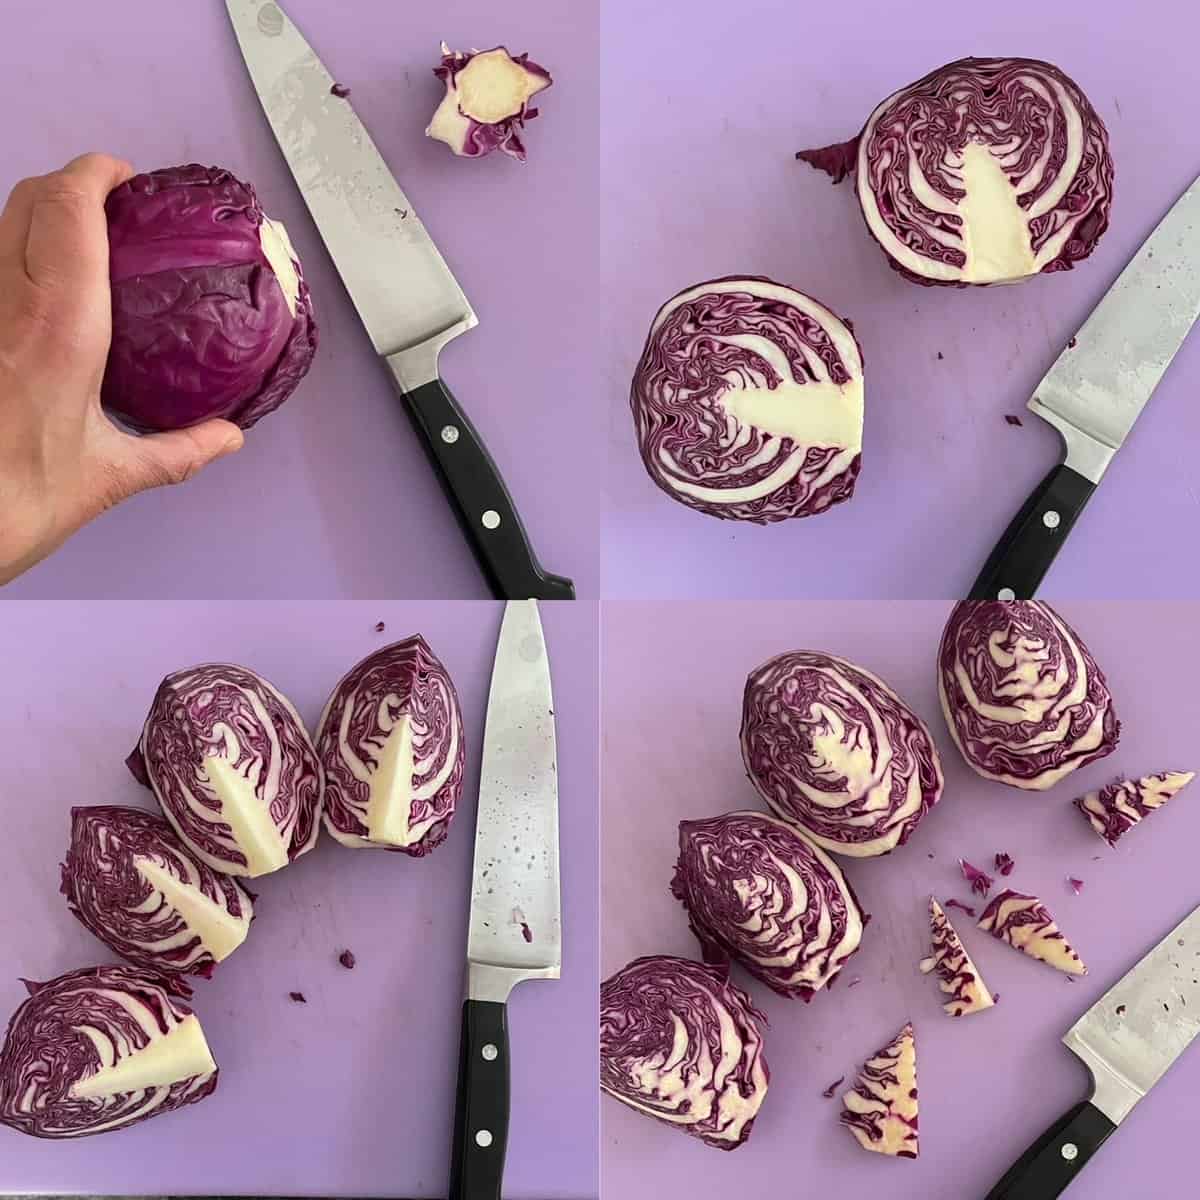 four panels showing steps in trimming and preparing the purple cabbage for shredding.